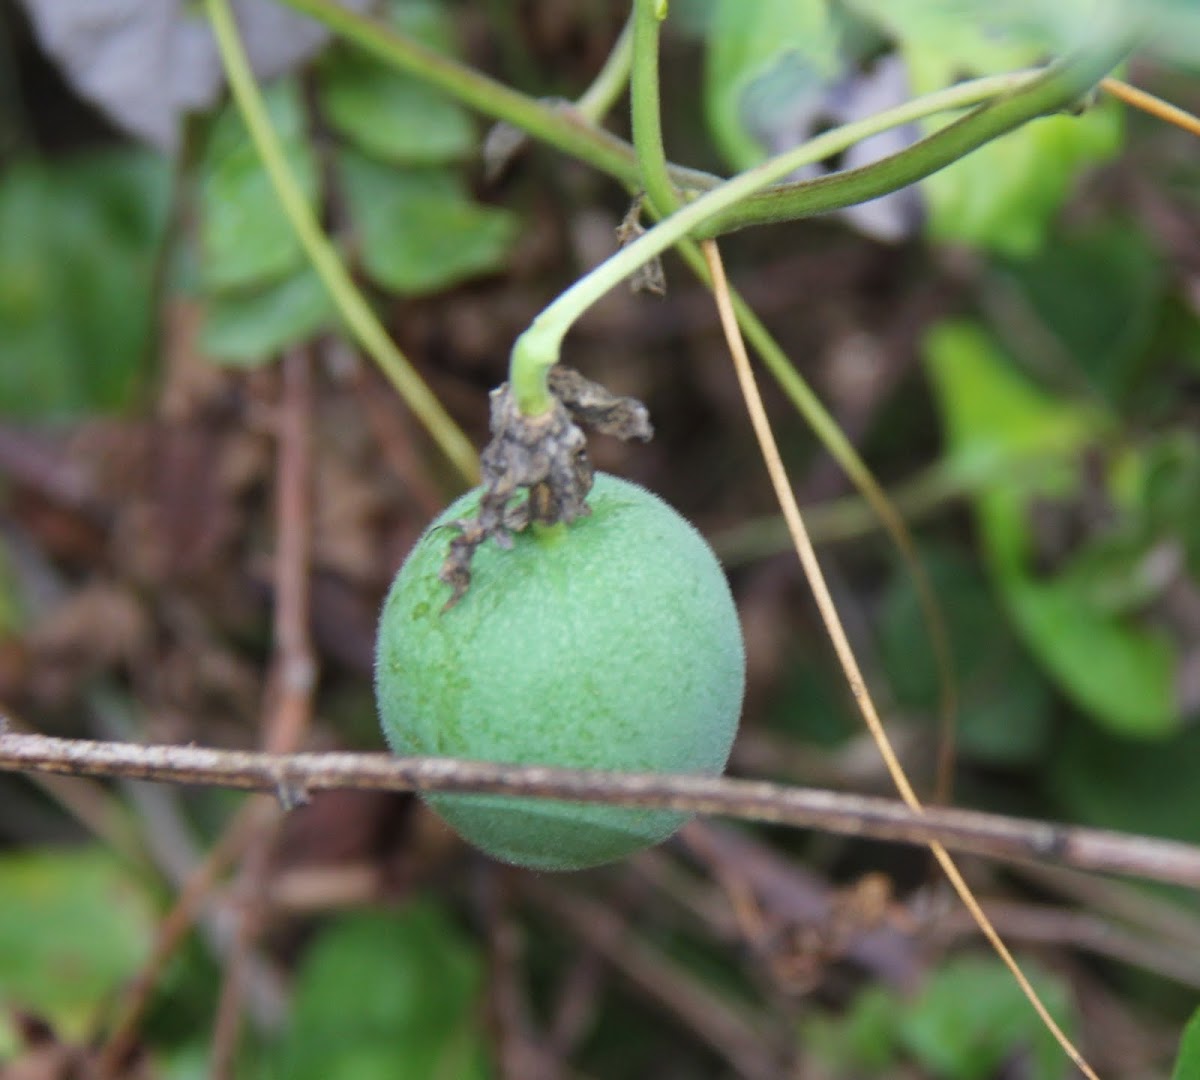 Maypop or passion flower fruit